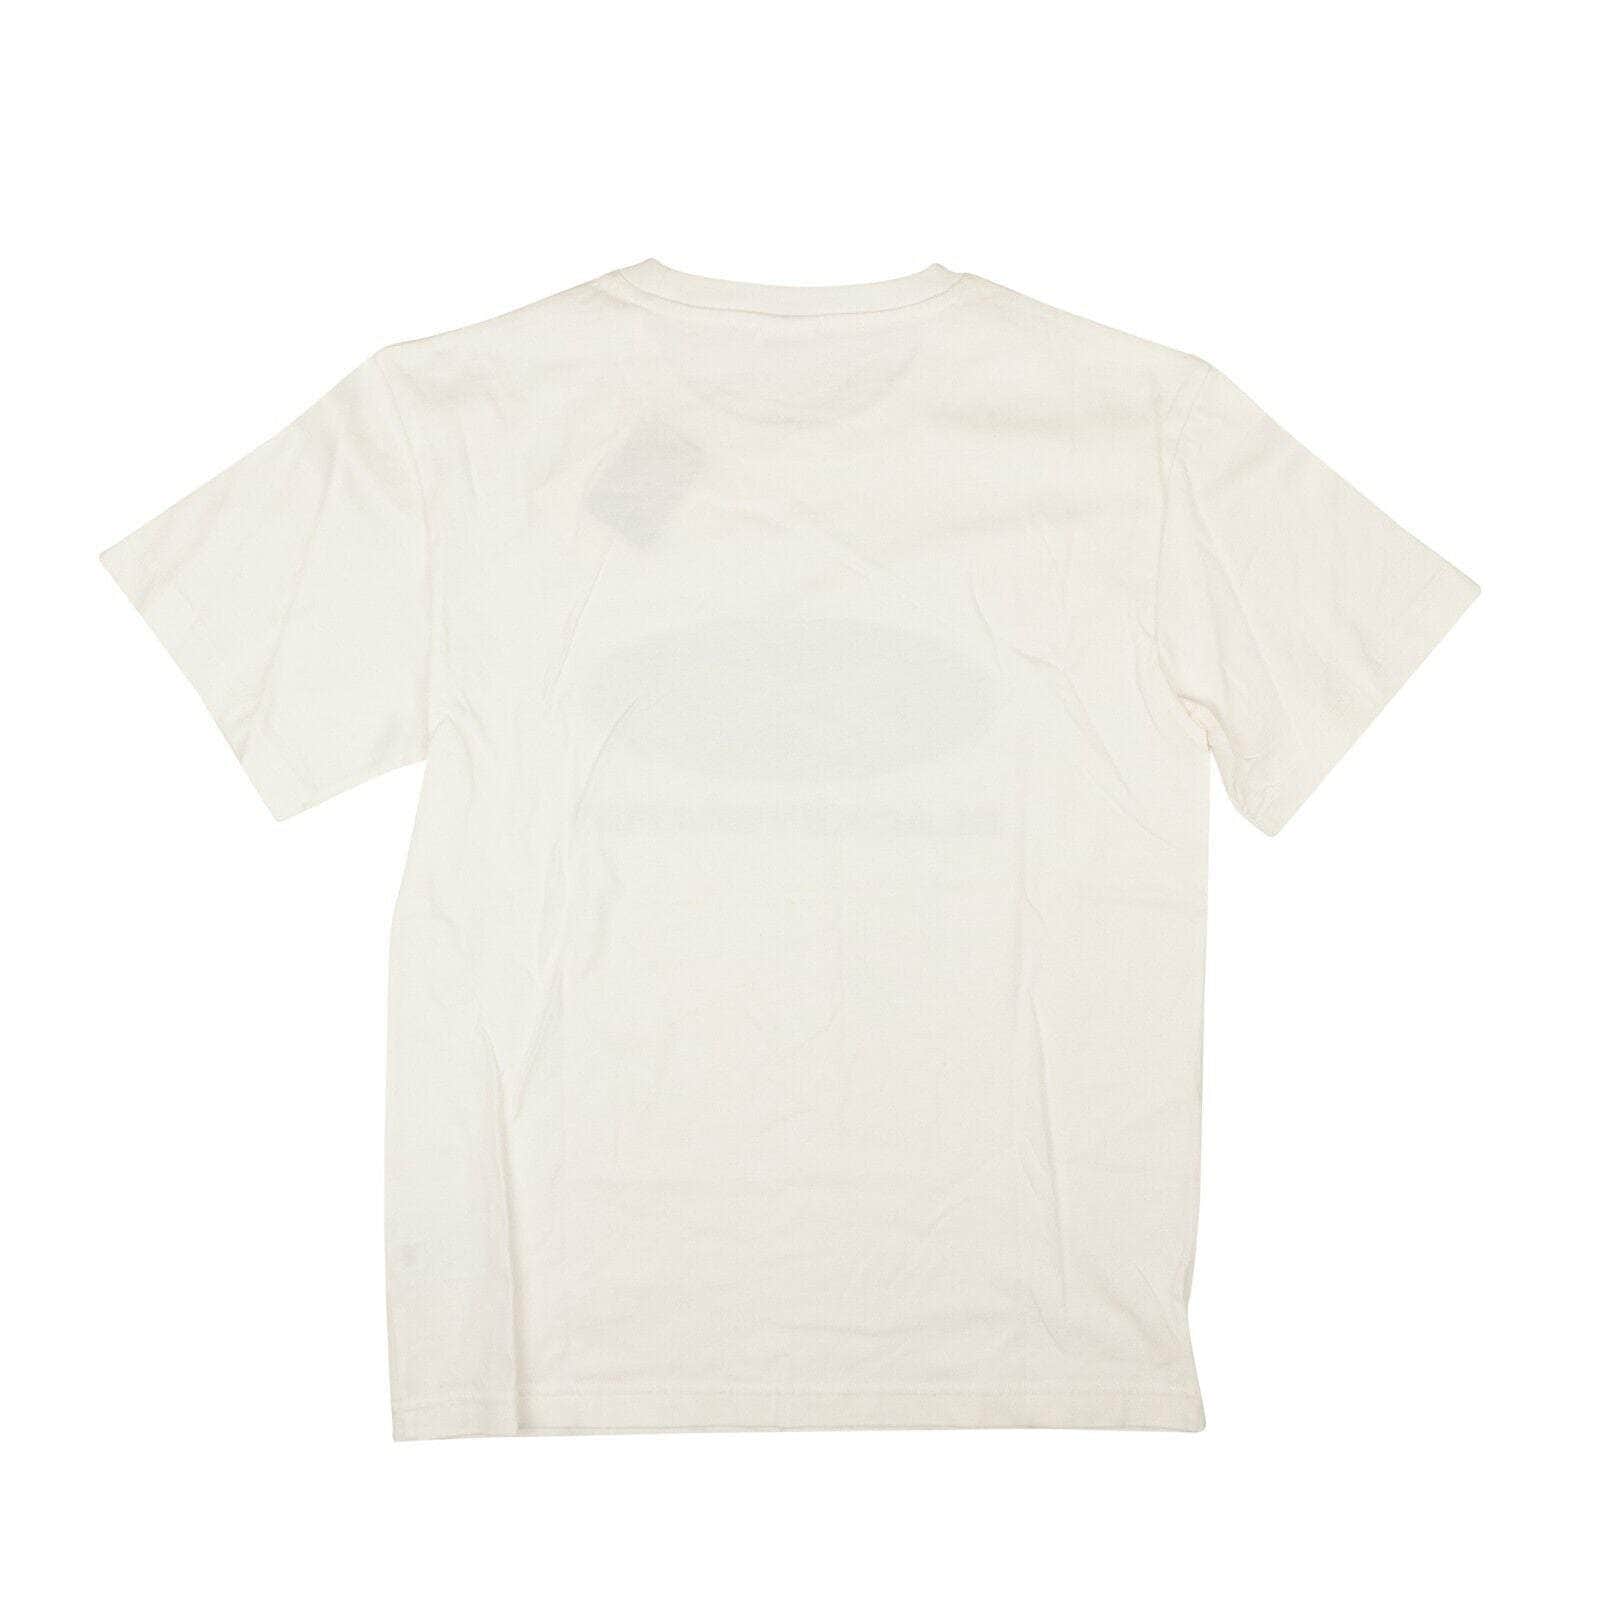 Rindende Mikroprocessor Skygge x Reebok White Cotton T-Shirt - GBNY